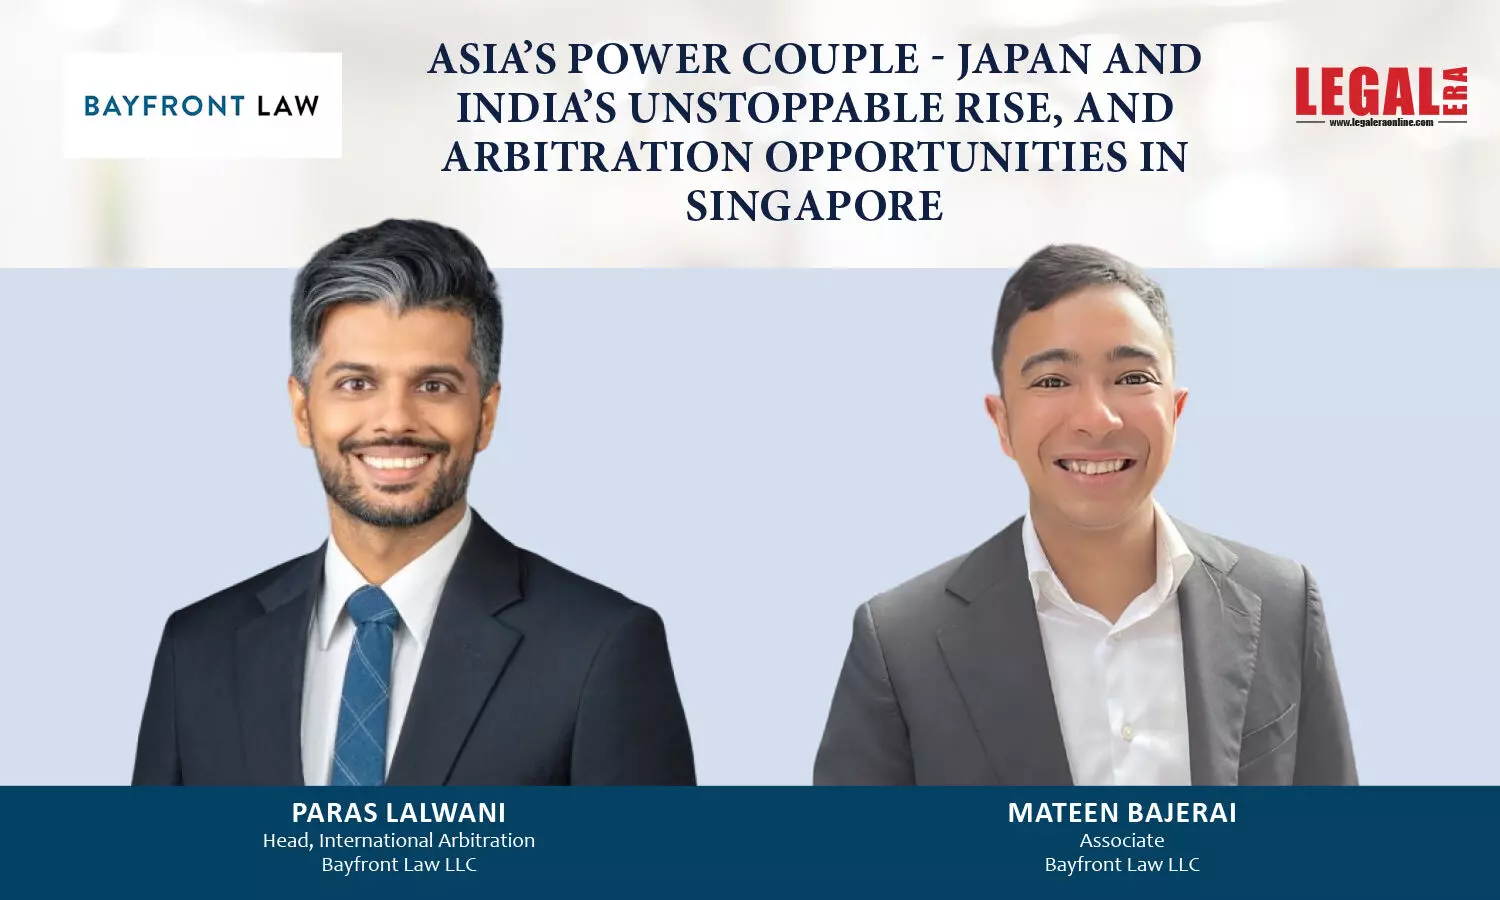 Asia’s Power Couple – Japan And India’s Unstoppable Rise, And Arbitration Opportunities In Singapore